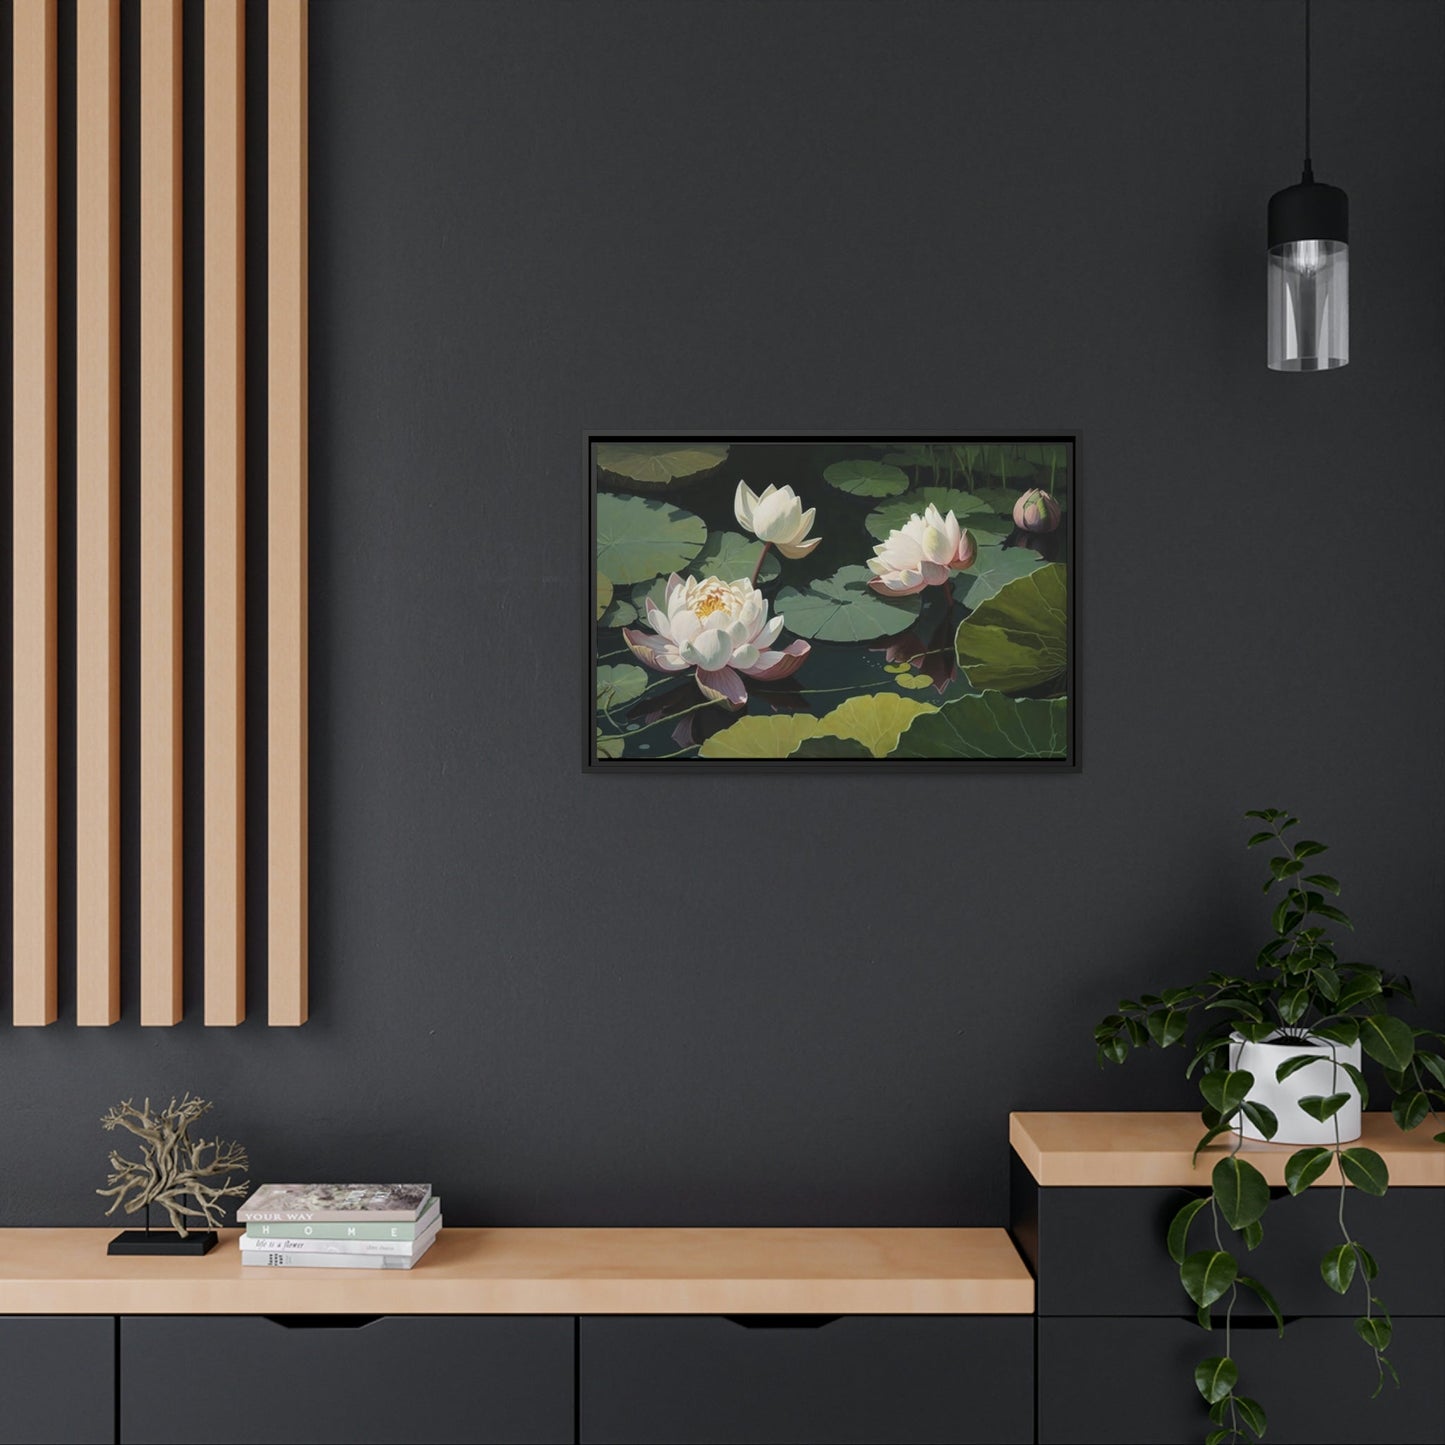 Lotus Bloom: Stunning Wall Art and Framed Poster